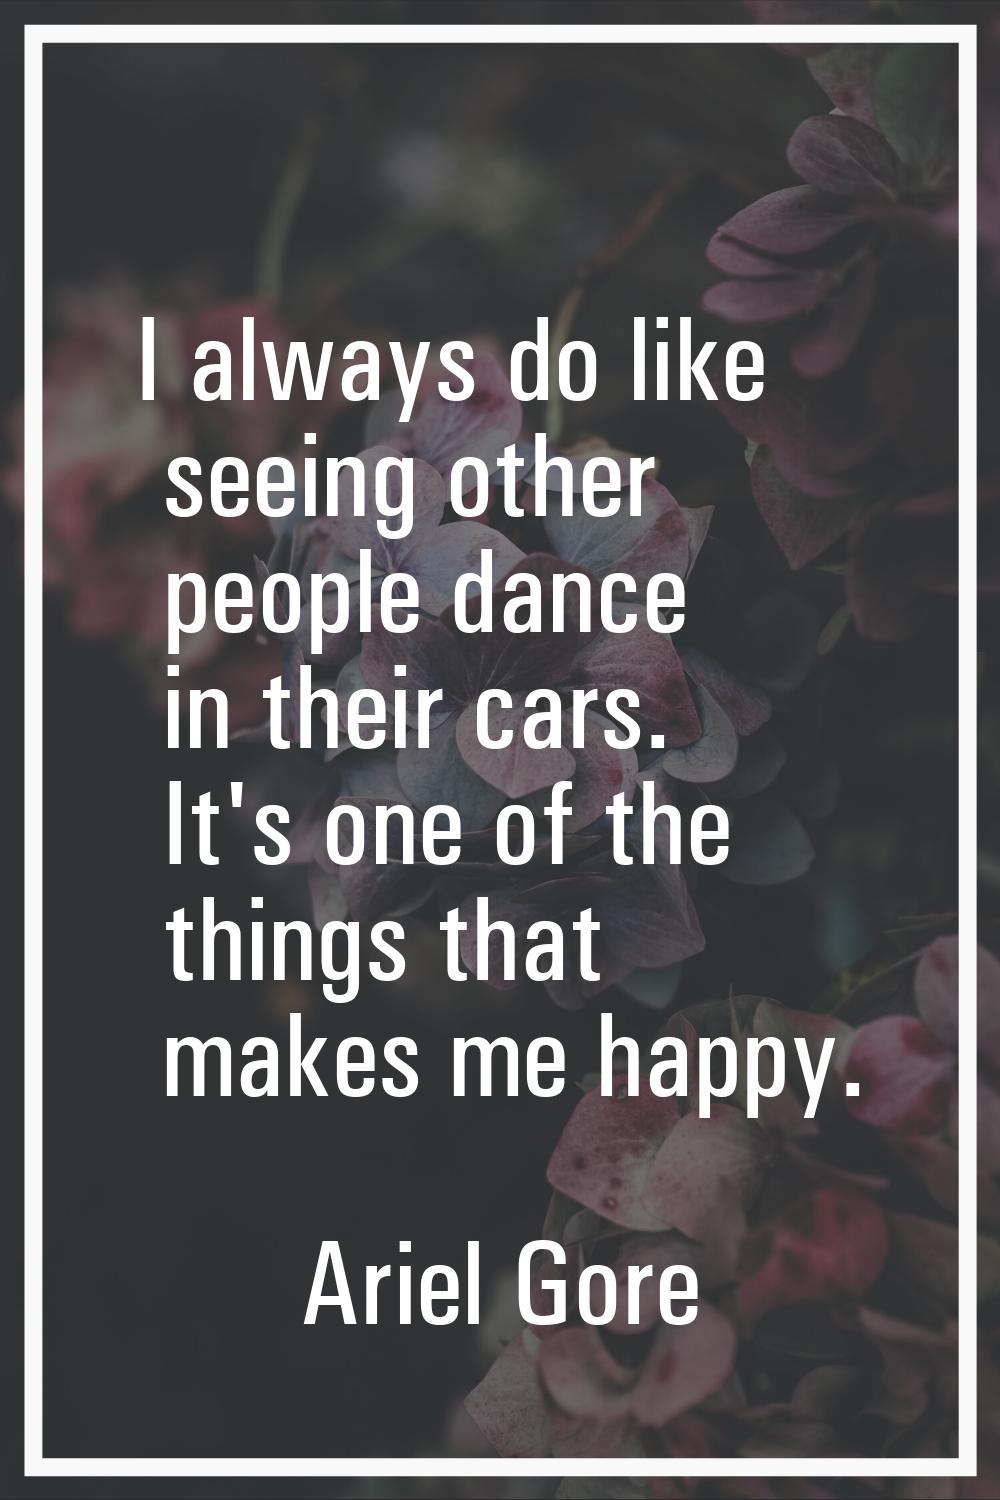 I always do like seeing other people dance in their cars. It's one of the things that makes me happ